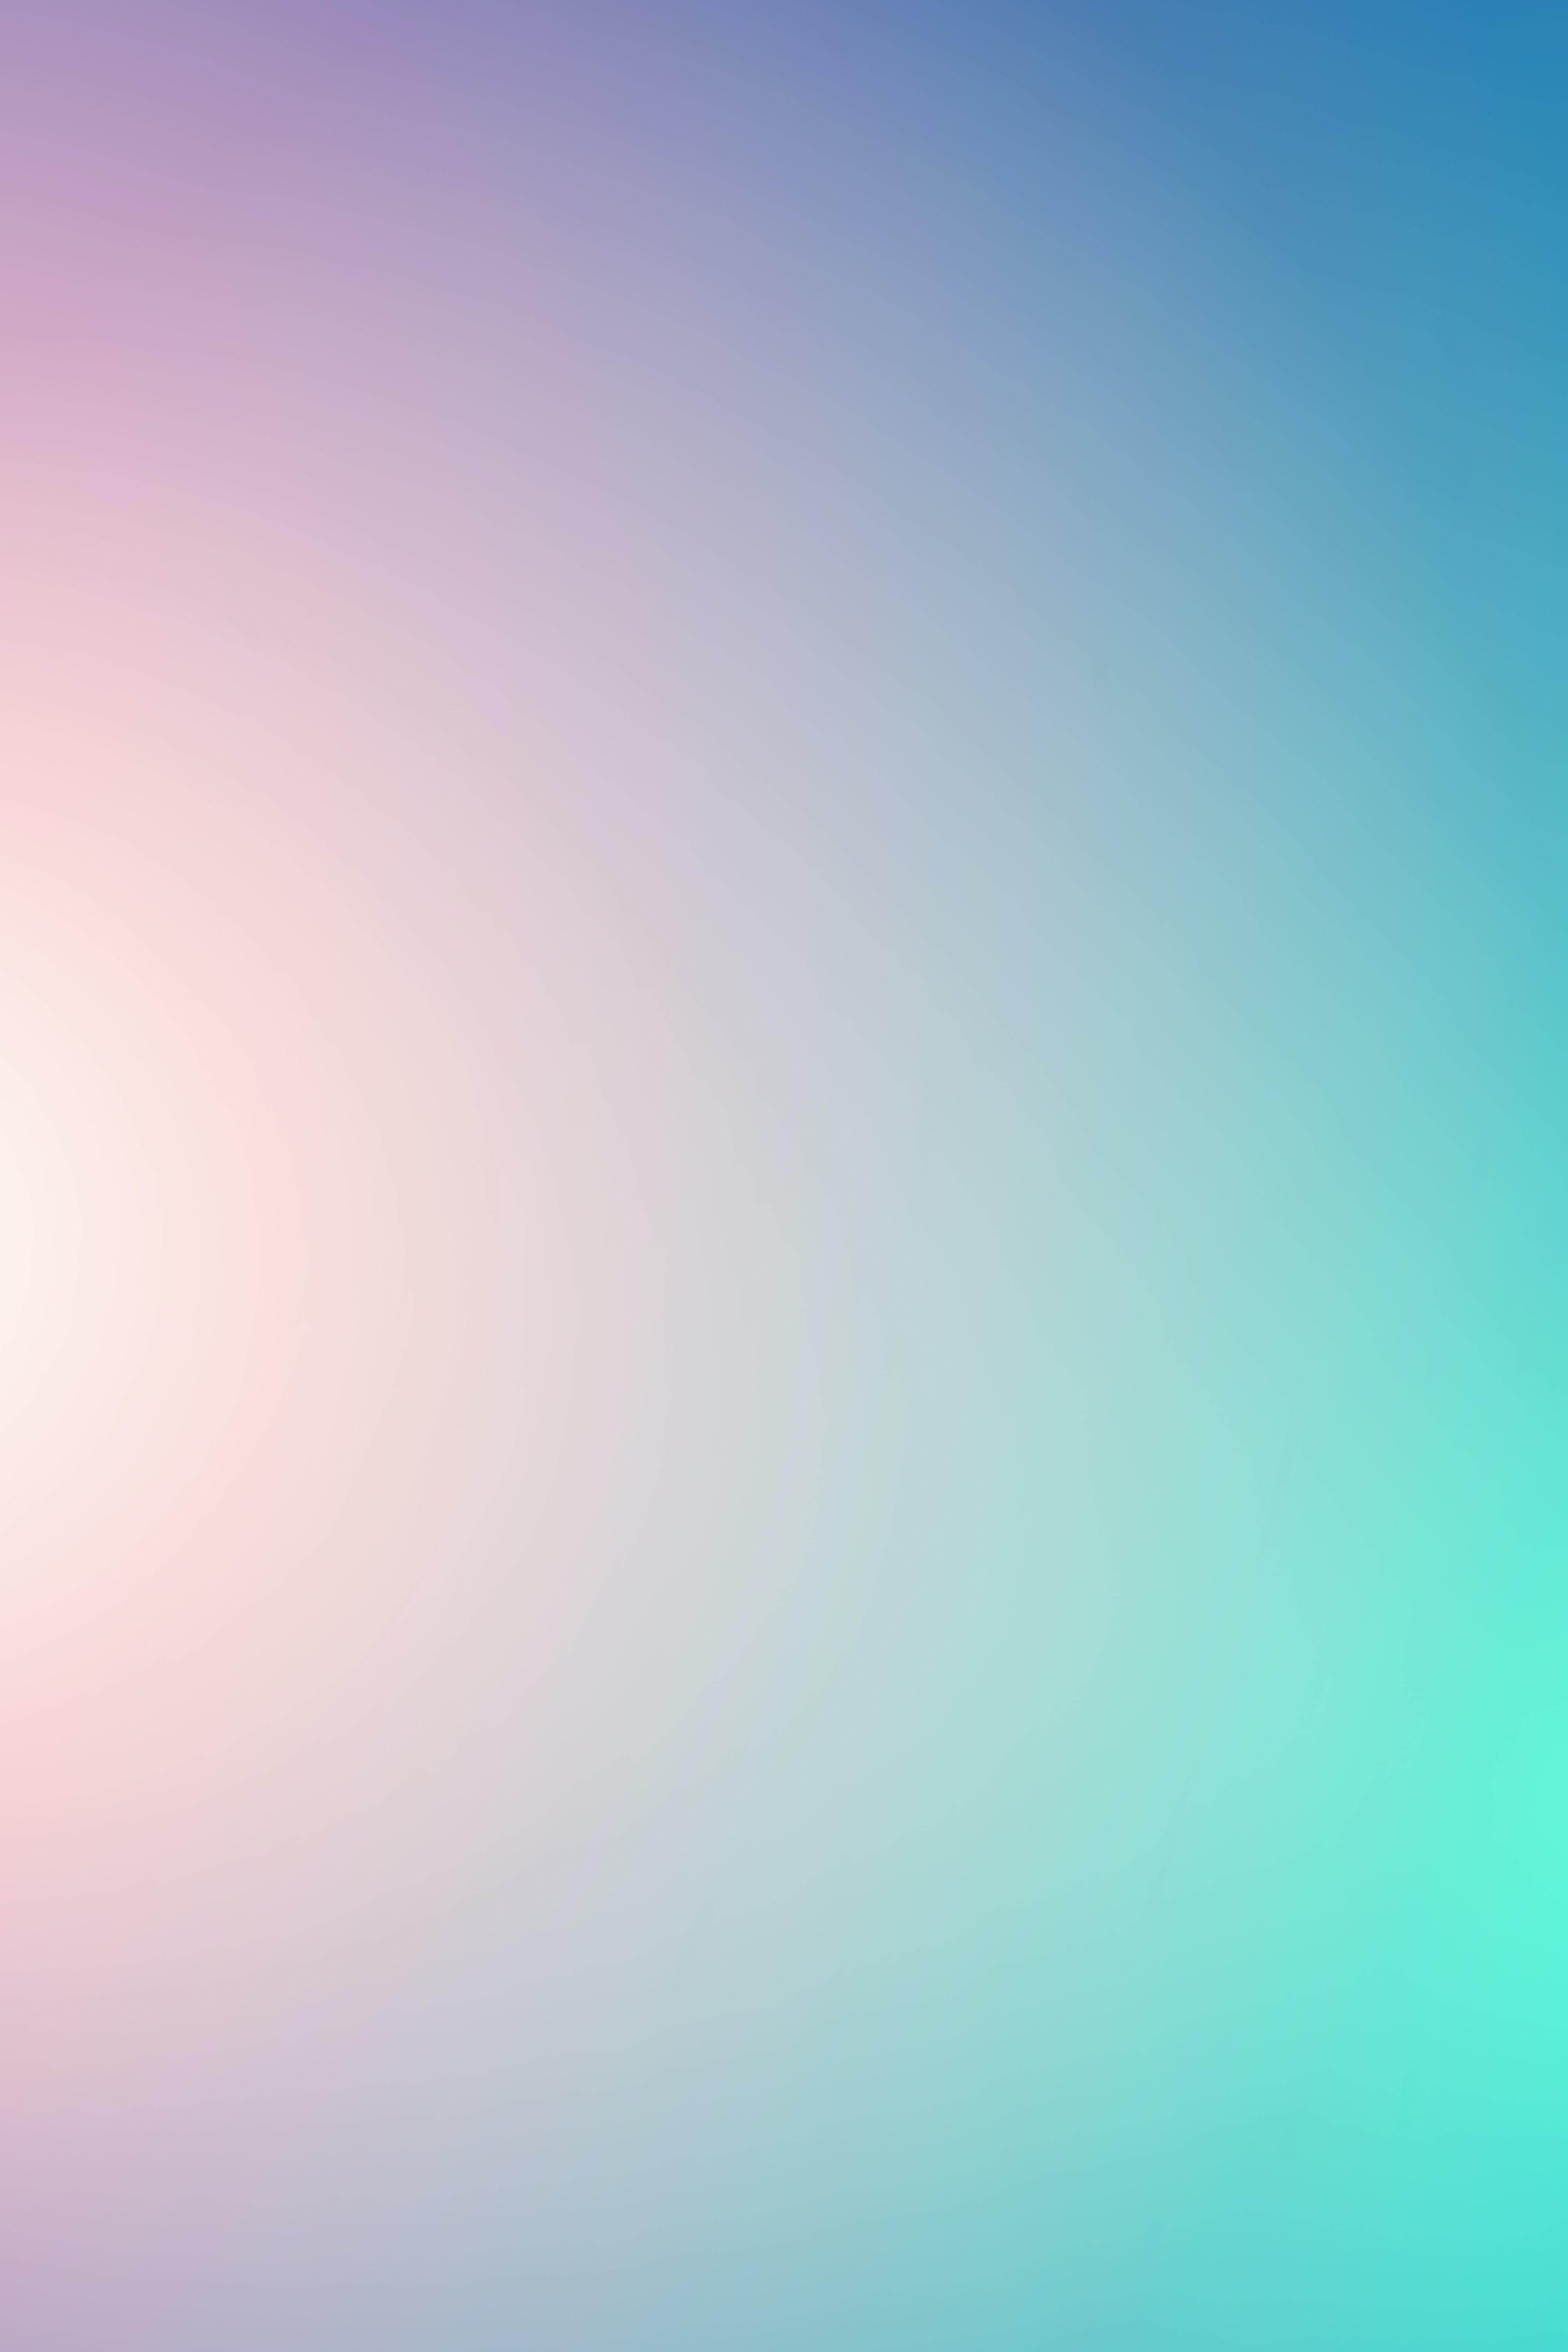 multicolored, gradient, motley, tender, abstract Full HD